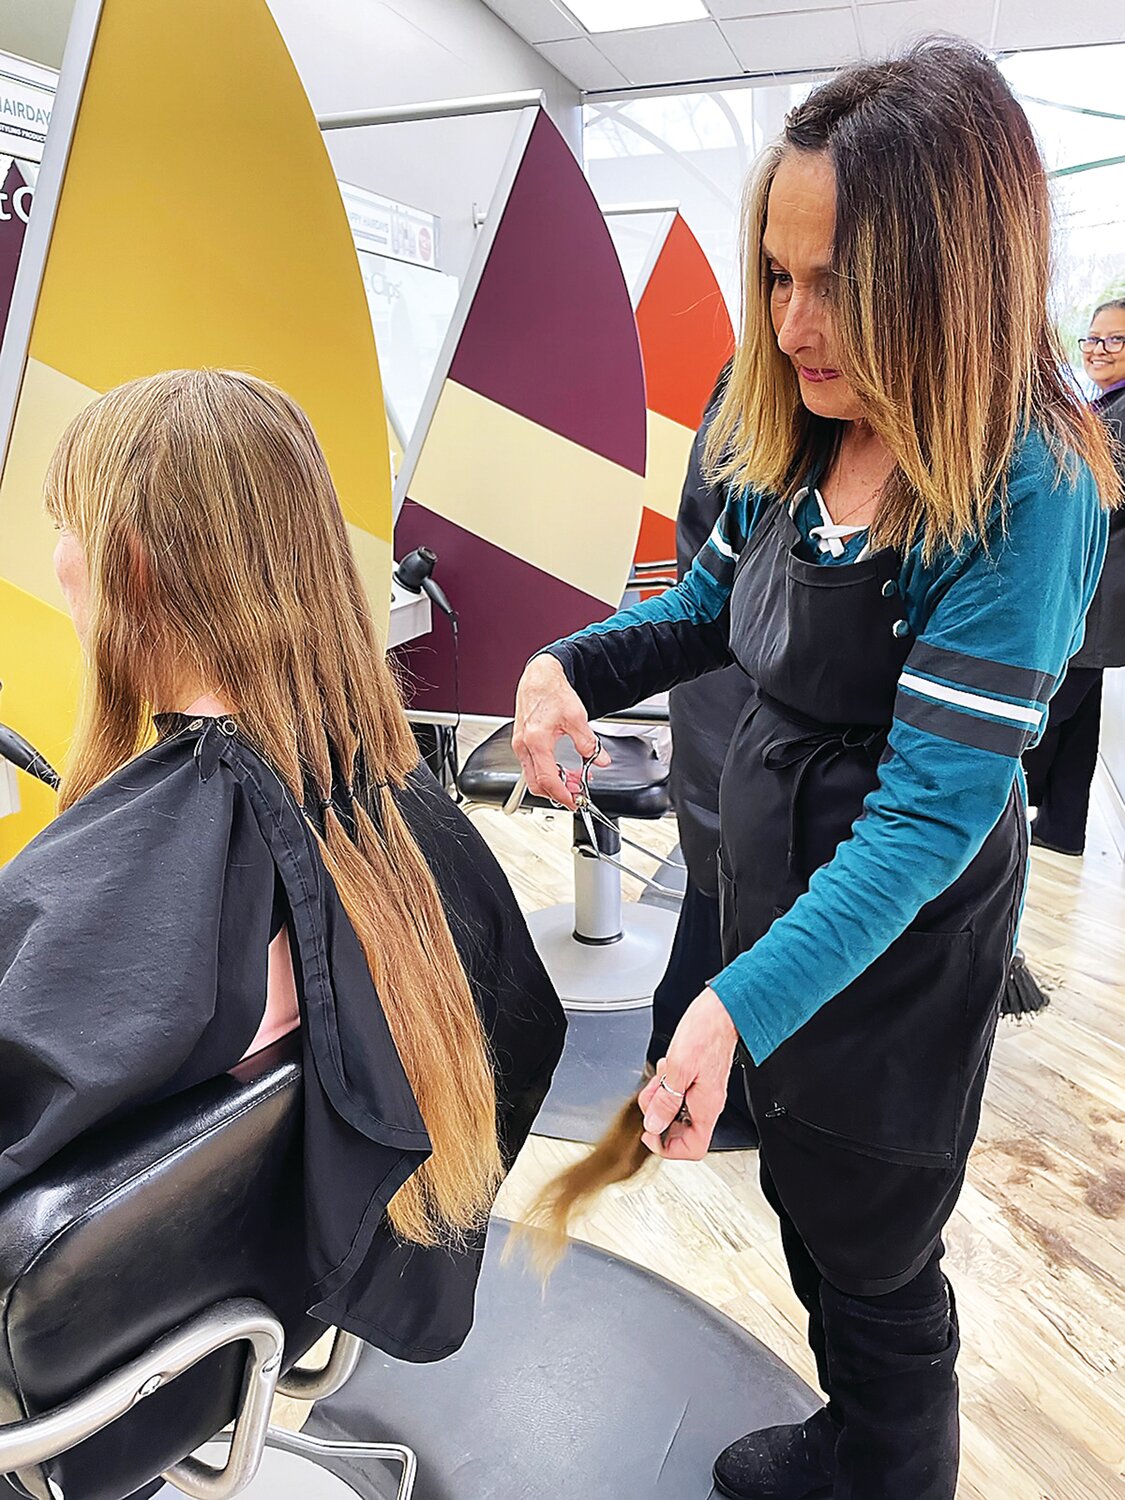 After growing out her hair for several years, Jane Jones had 13 inches cut off on Dec. 31, 2023, at Great Clips in Doylestown. She sent her locks to Wigs for Kids – her third hair donation to the nonprofit organization since 2016.